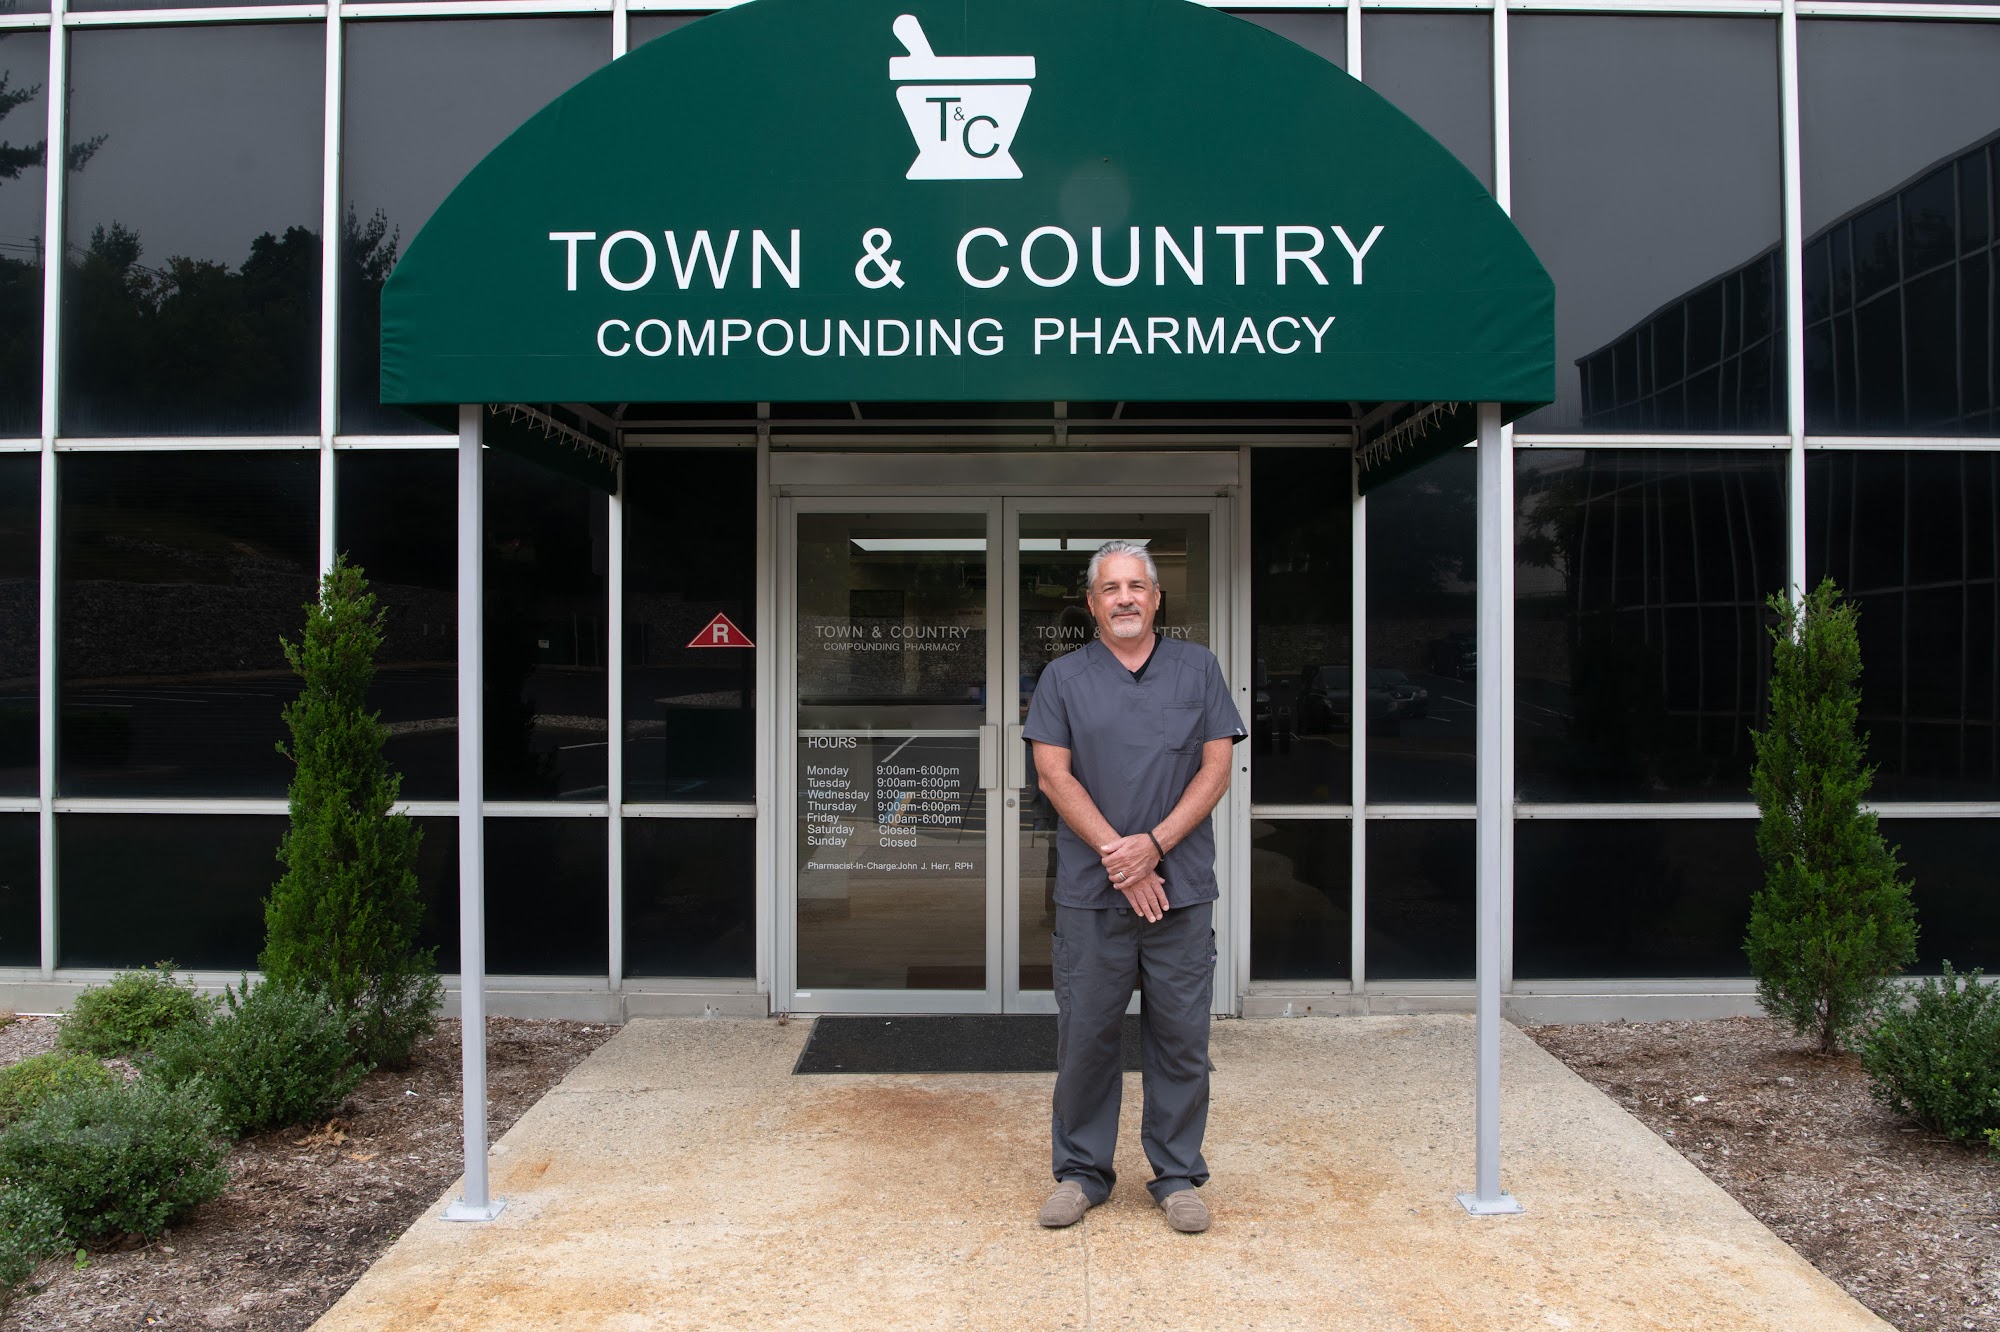 Town & Country Compounding Pharmacy